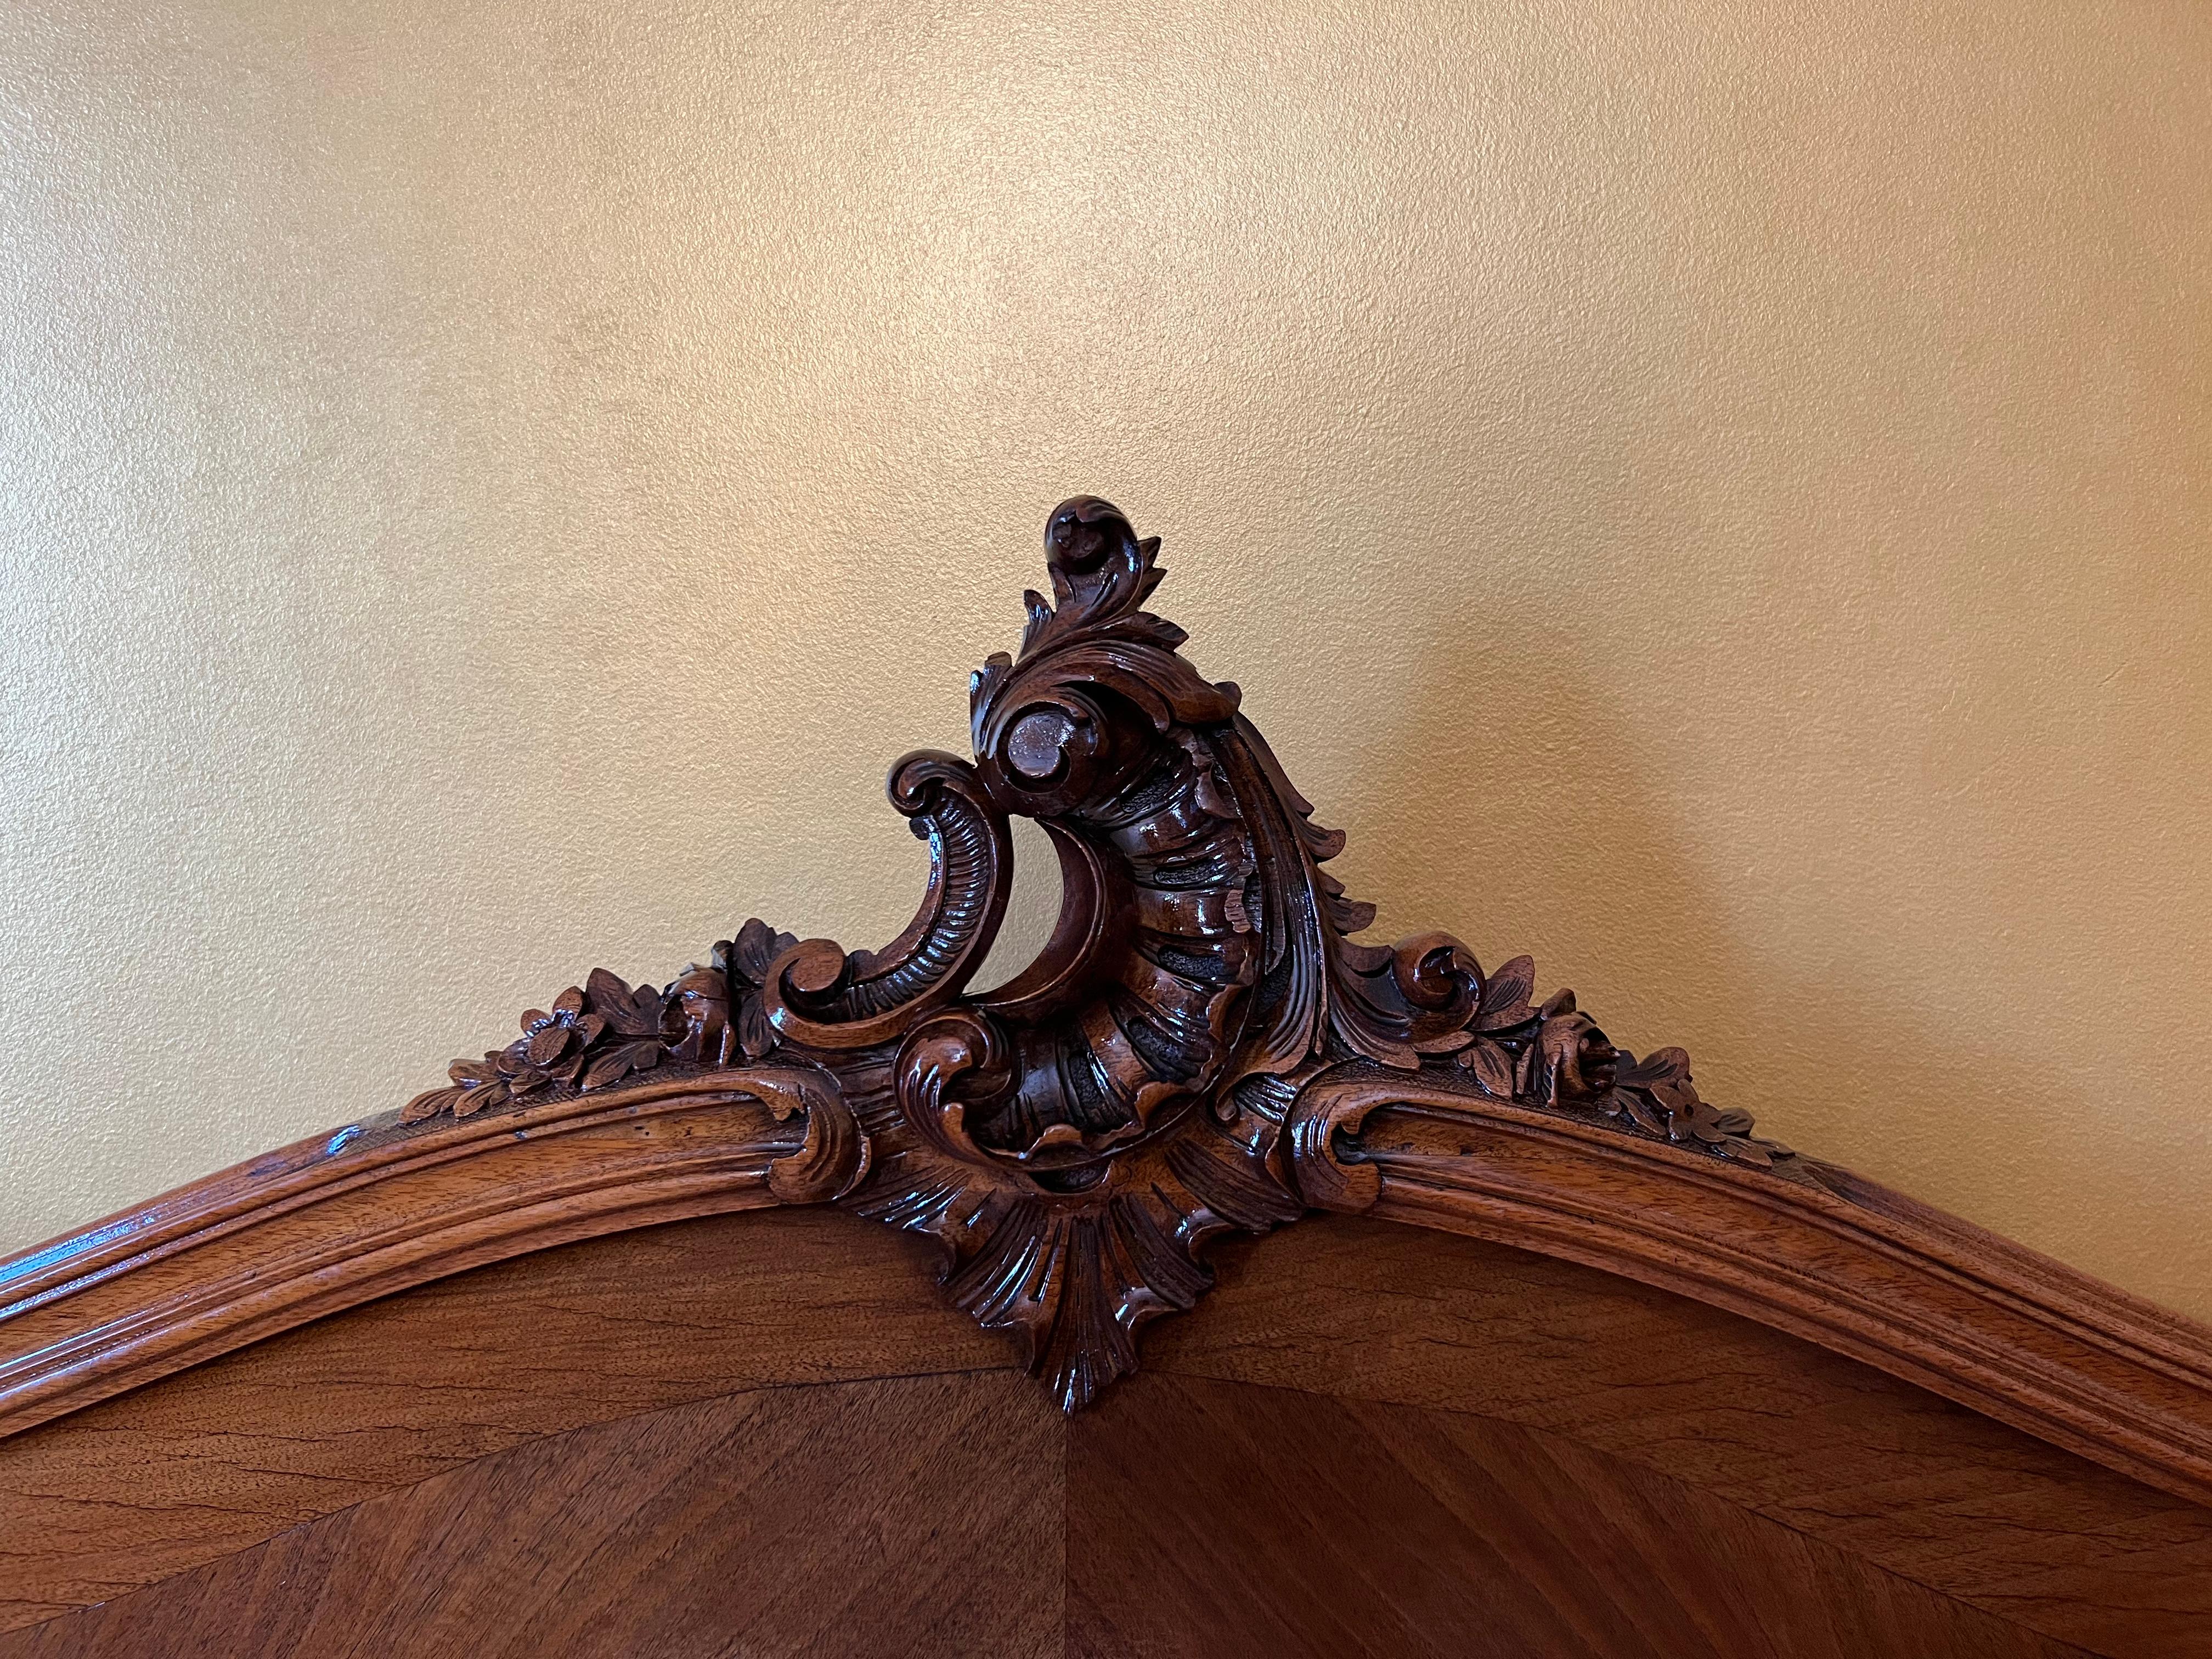 Curved detail to both head and front boards, carved wood detailing on all legs, centrepiece intricate detailing, beautiful checker design in wood on both head and front boards.

Size: measurements are below, the internal width is 131cm a standard